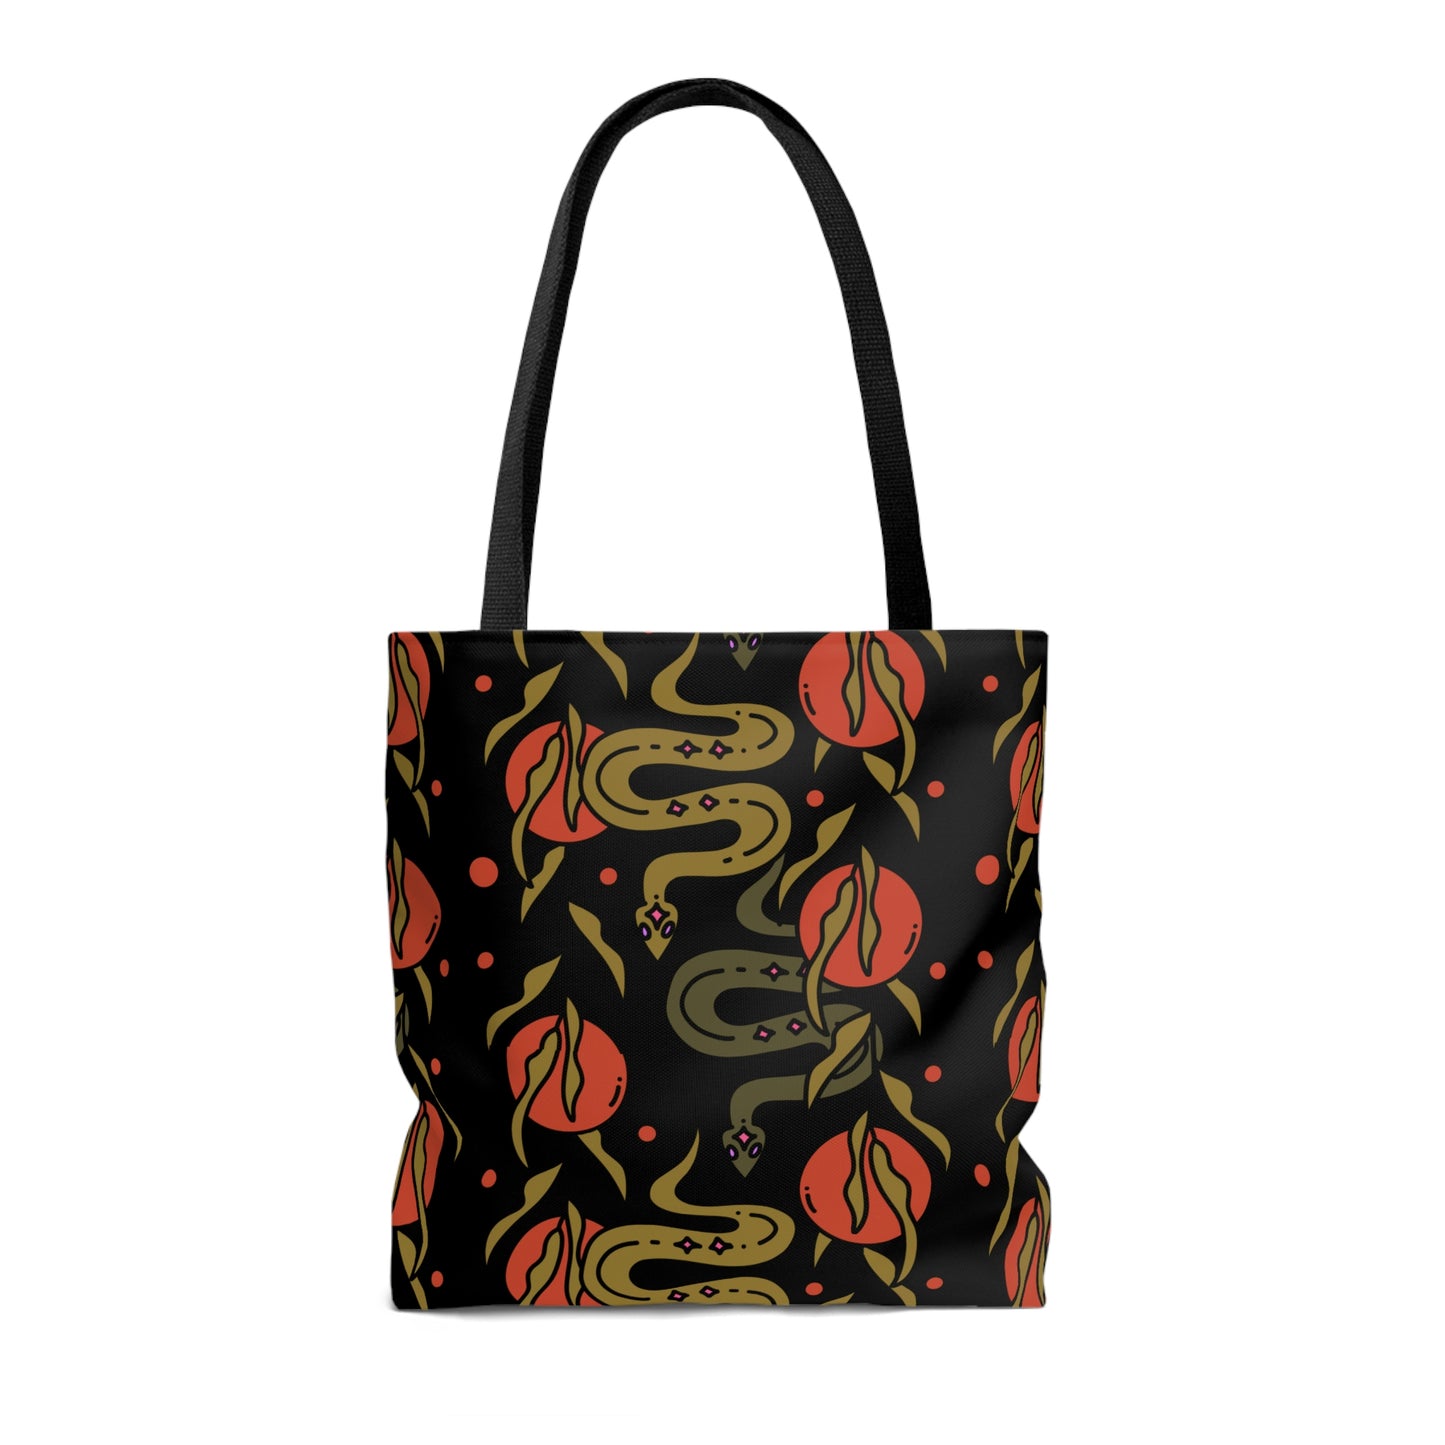 House of the Rising Sun Tote Bag